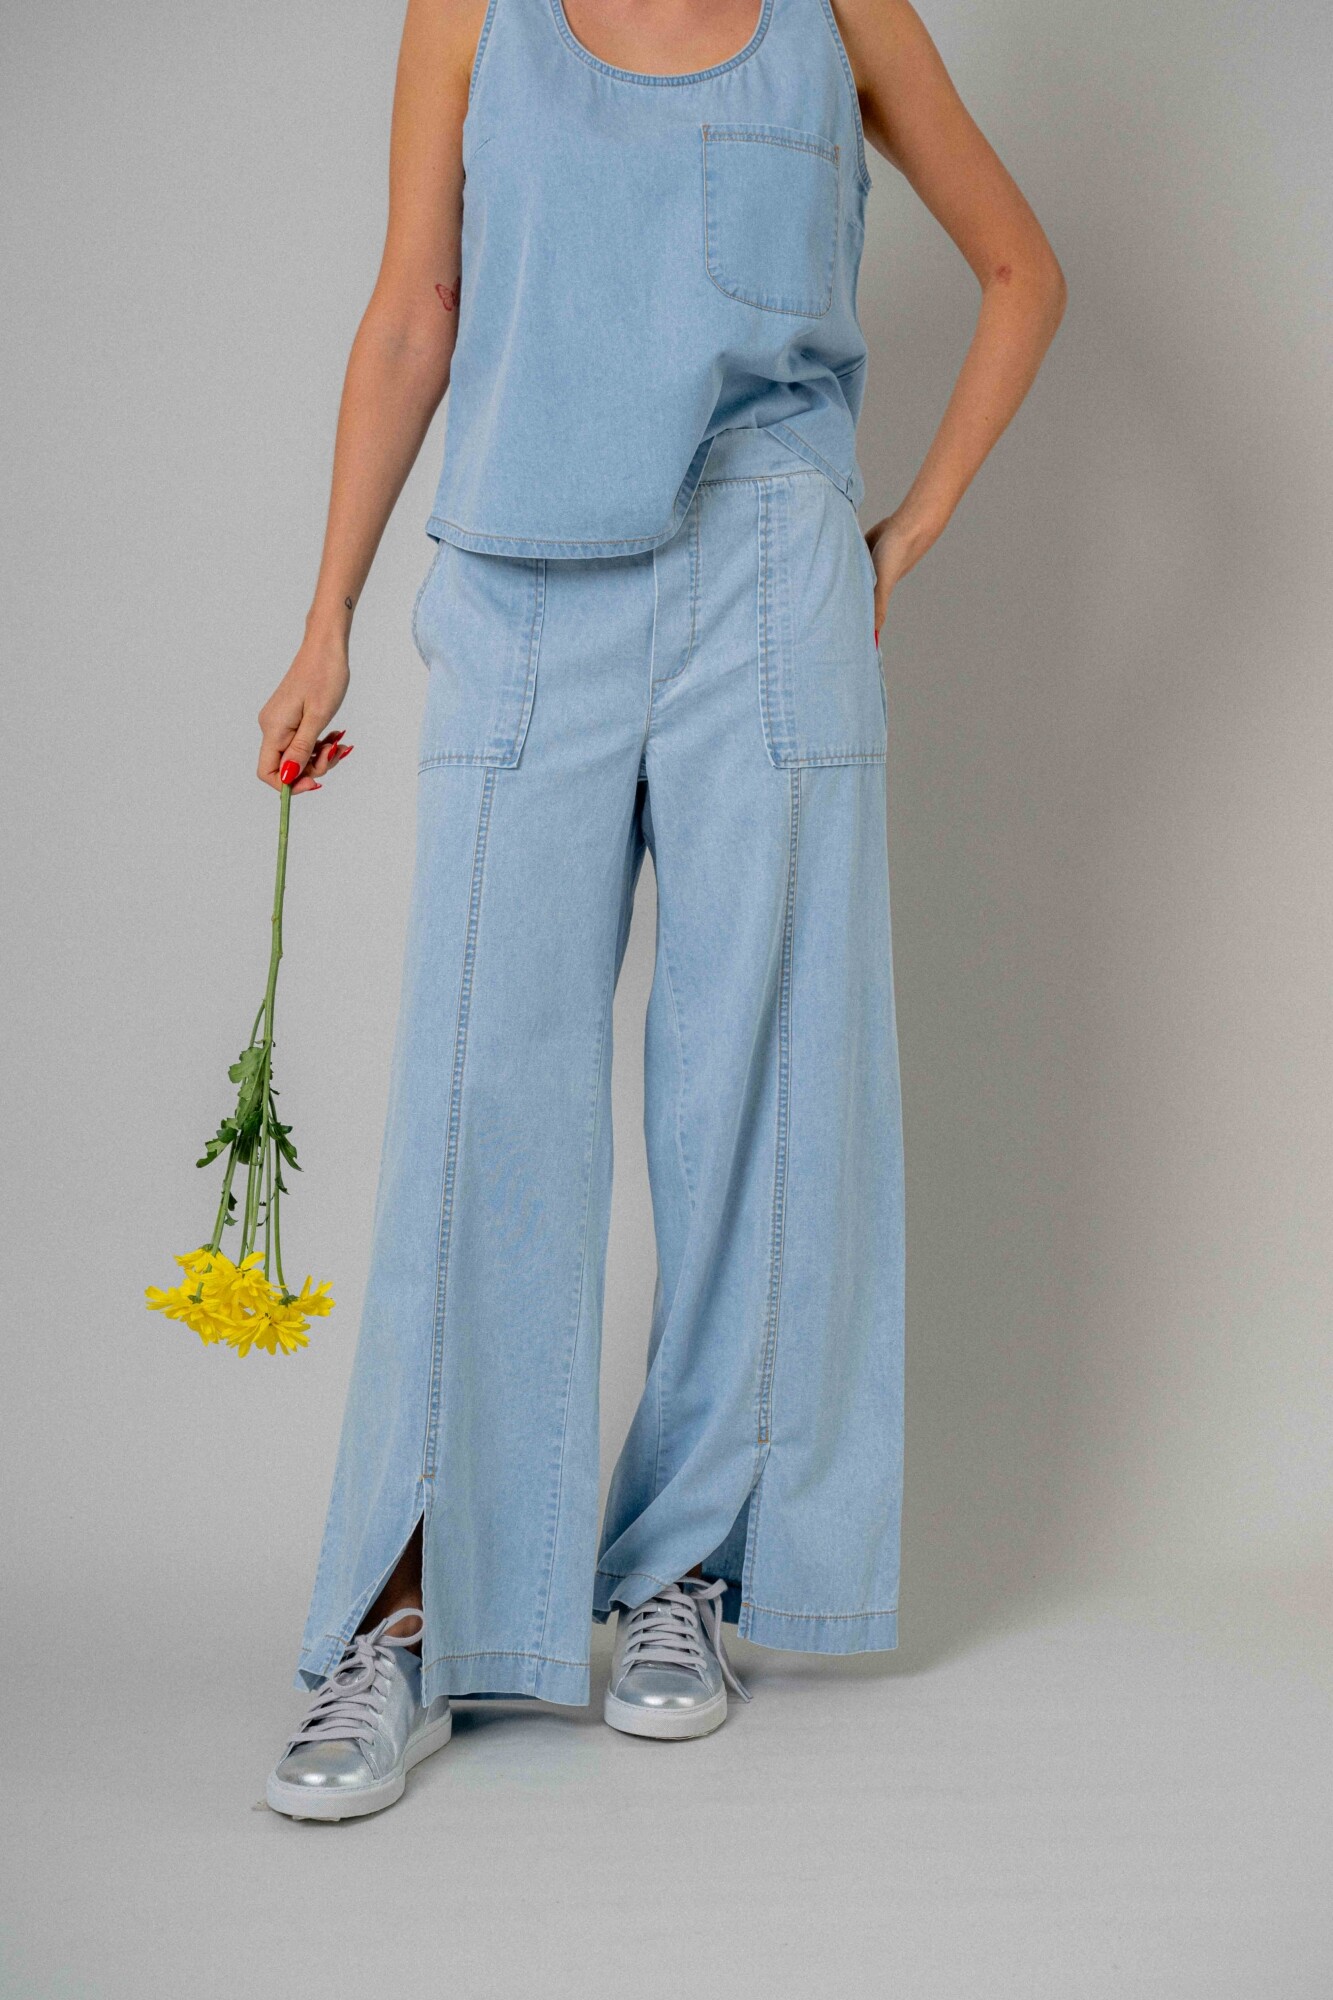 Real Housewives of New Jersey: Season 12 Episode 3 Melissa's Denim Jumpsuit  | Shop Your TV